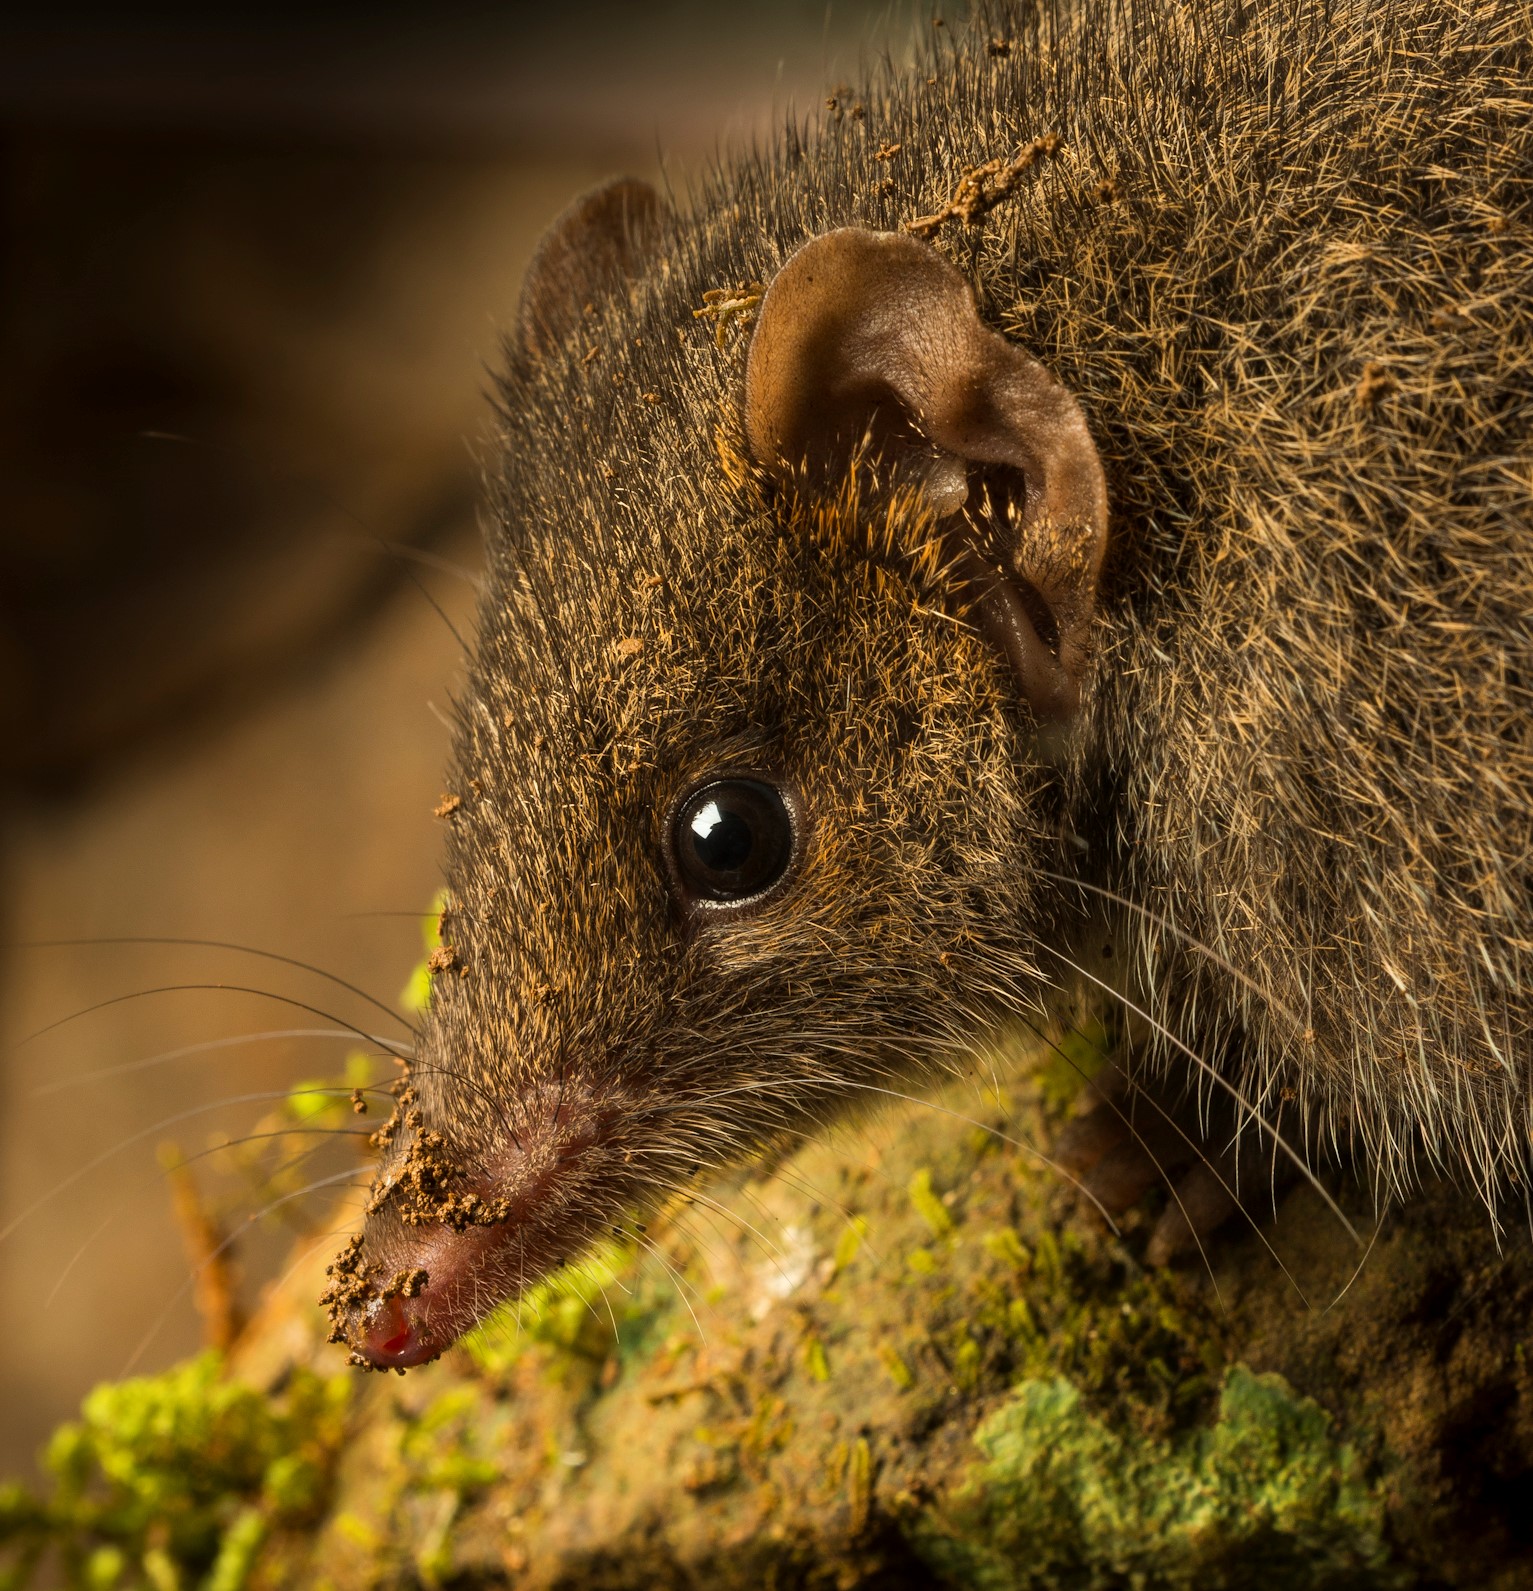 The black-tailed dusky antechinus was only discovered five years ago in Australia and now the researcher who identified it fears it could be on the brink of extinction as a result of climate change and intense bush fires. (Gary Cranitch&mdash;Queensland Museum)